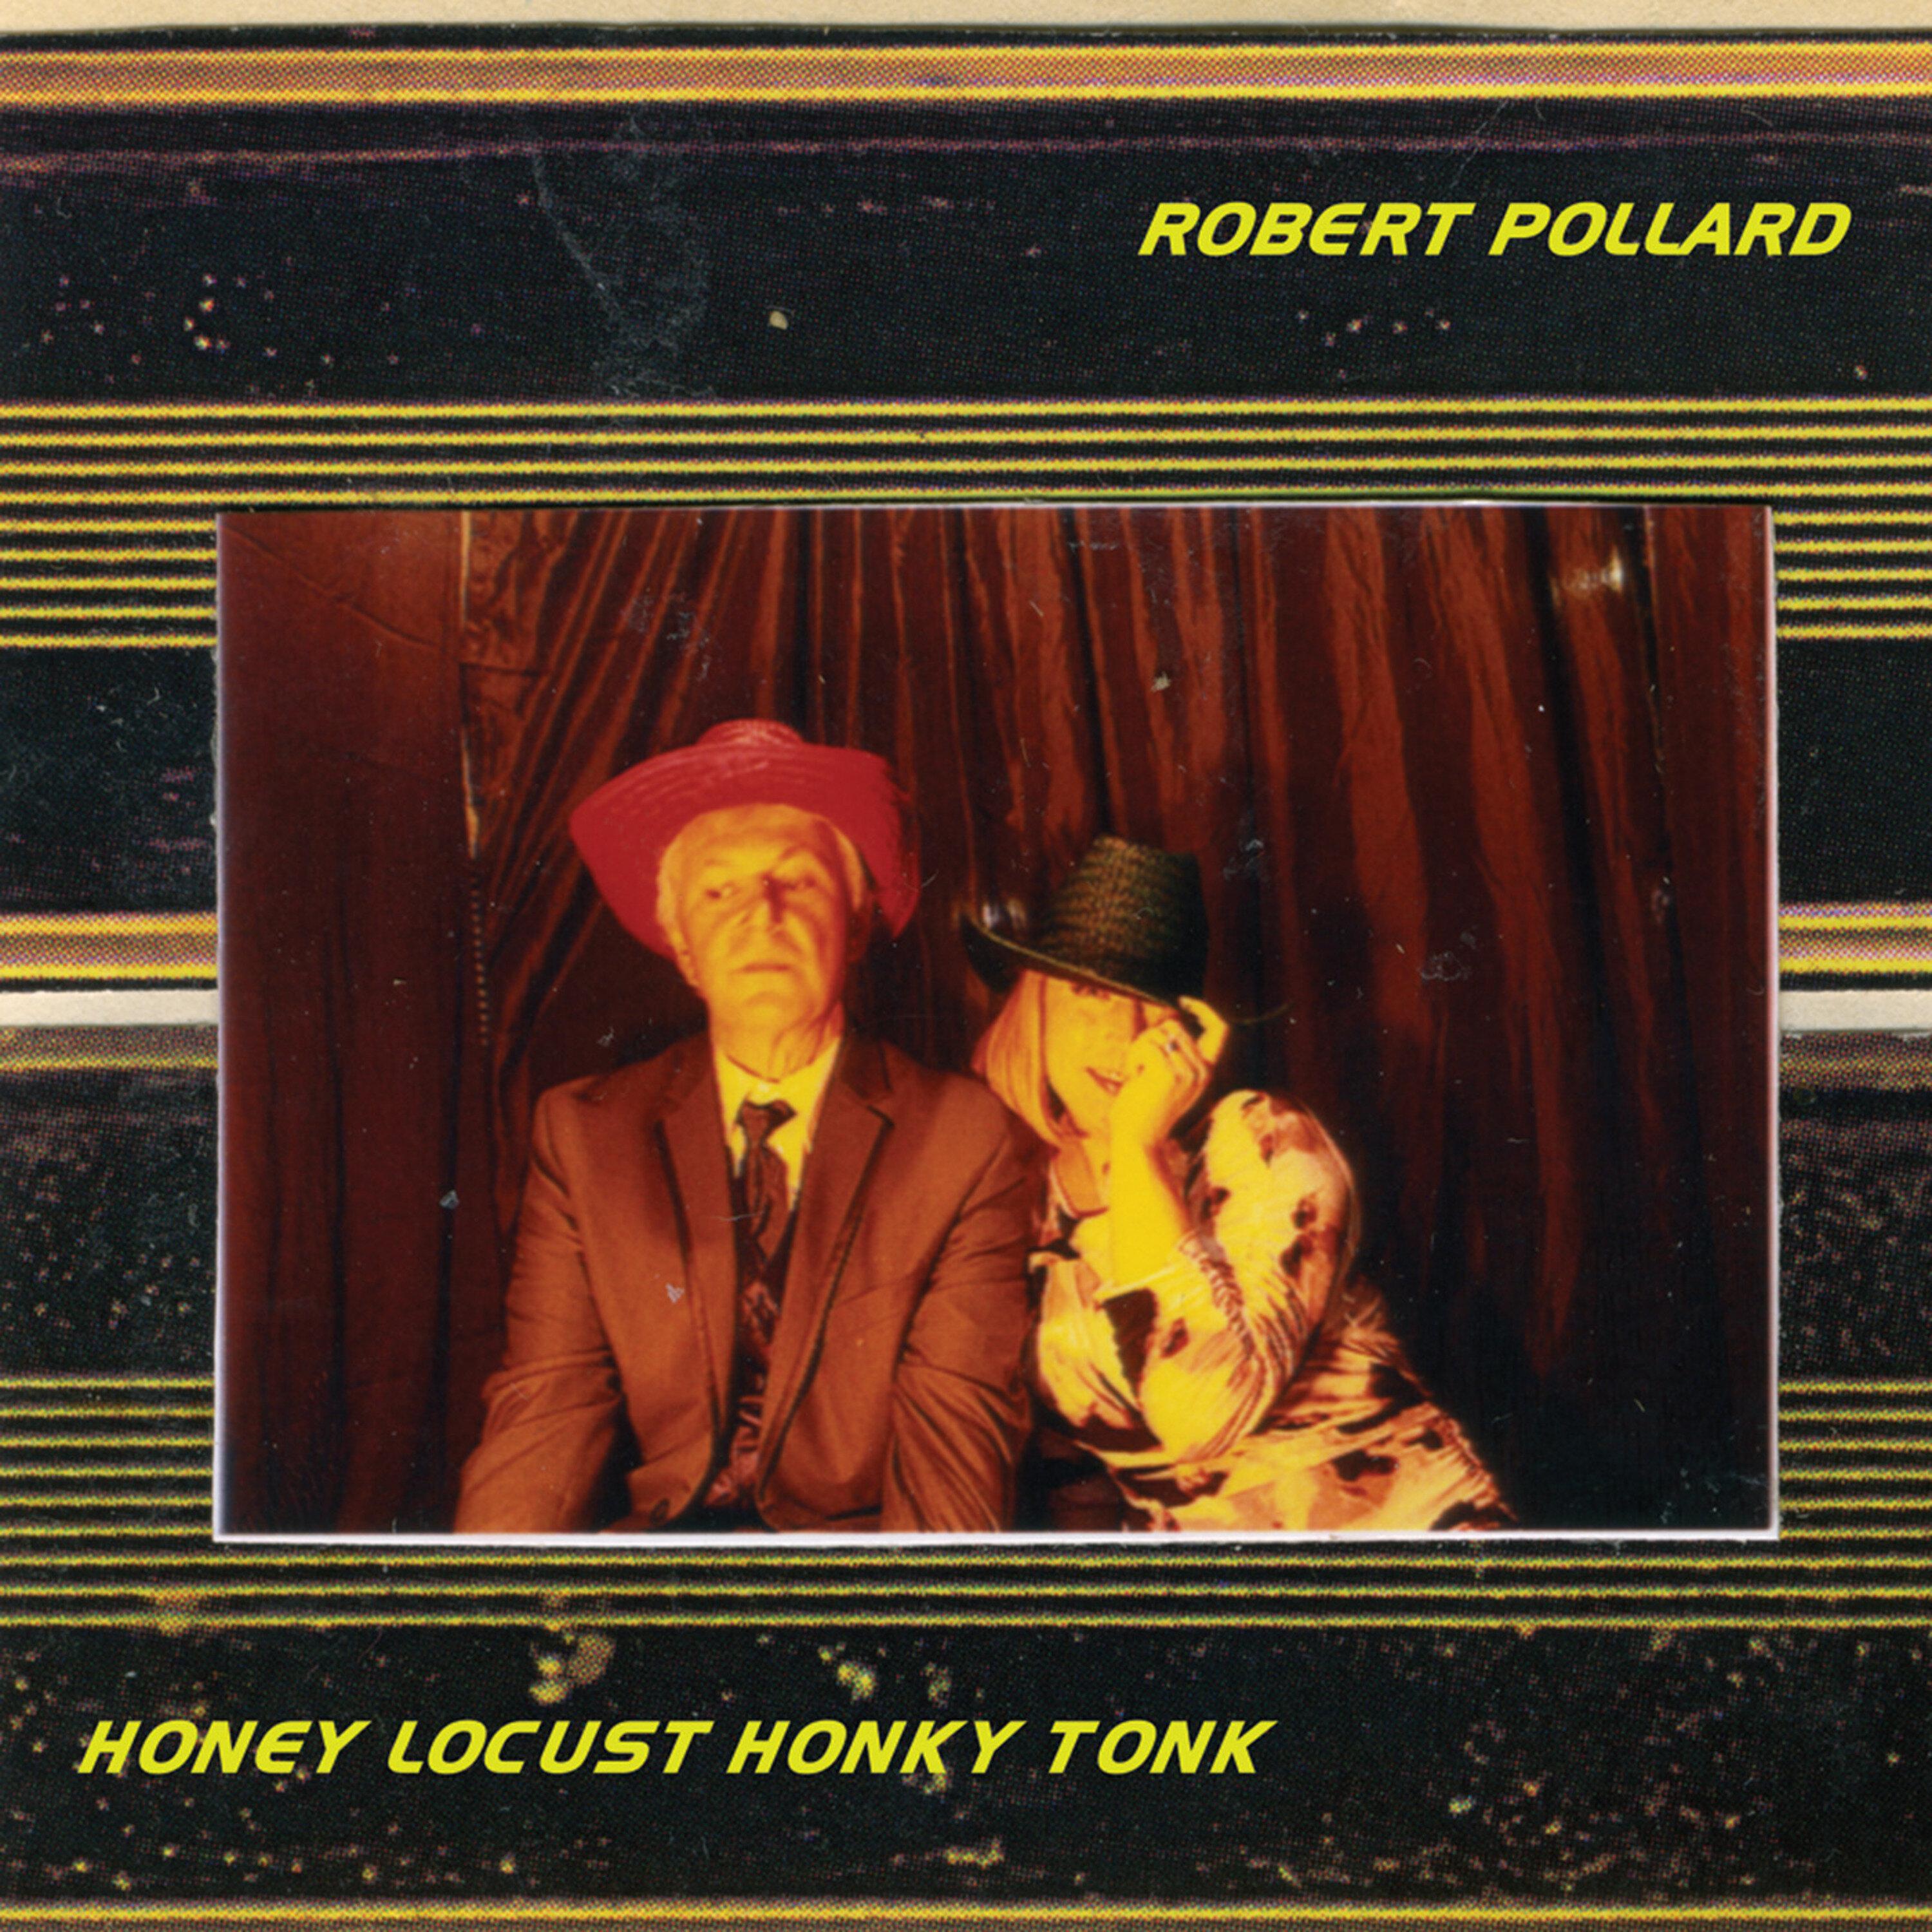 Robert Pollard - It Disappears in the Least Likely Hands (We May Never Not Know)